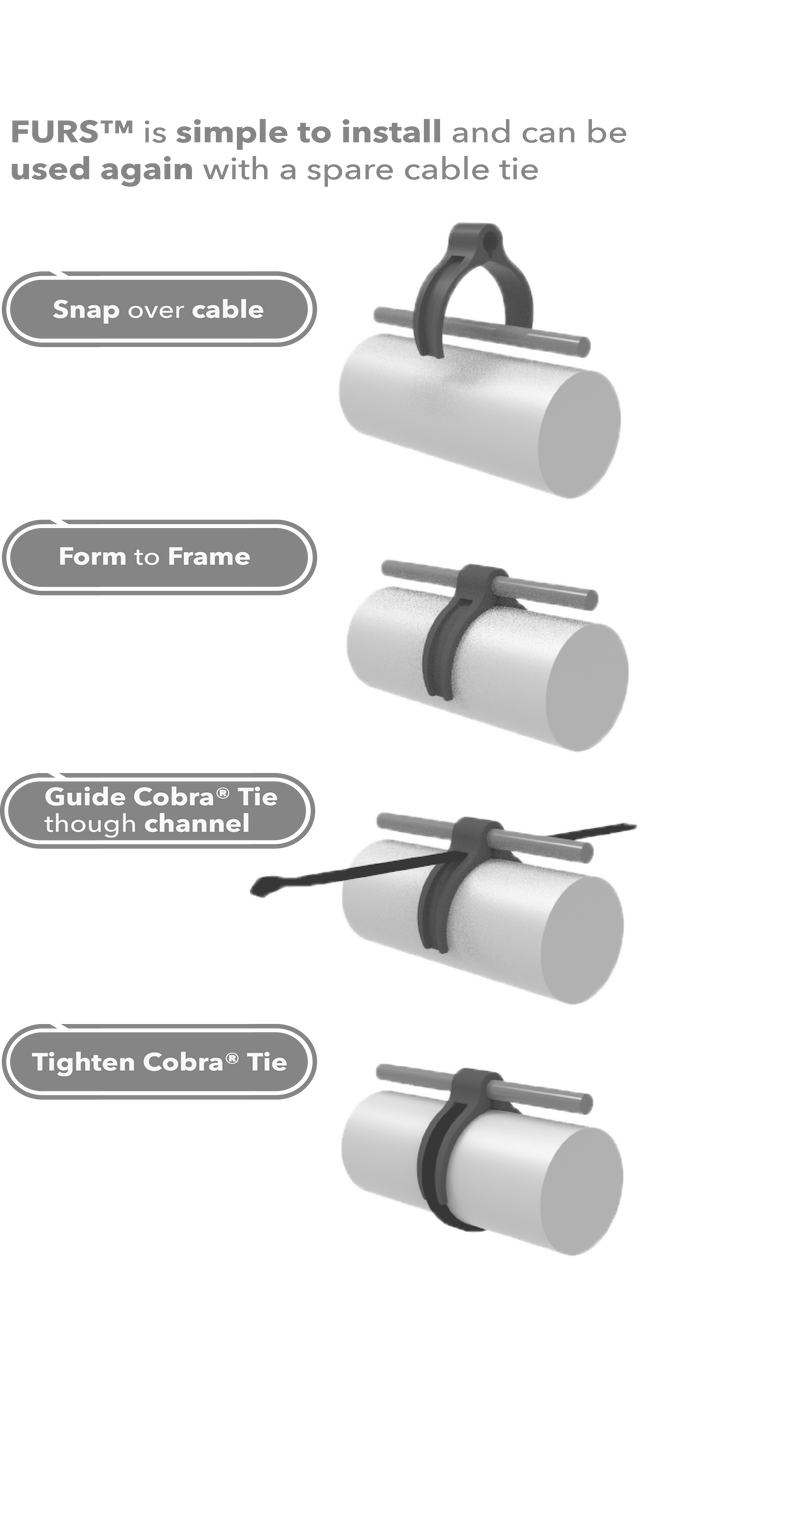 Flexroute cable routing system instructions